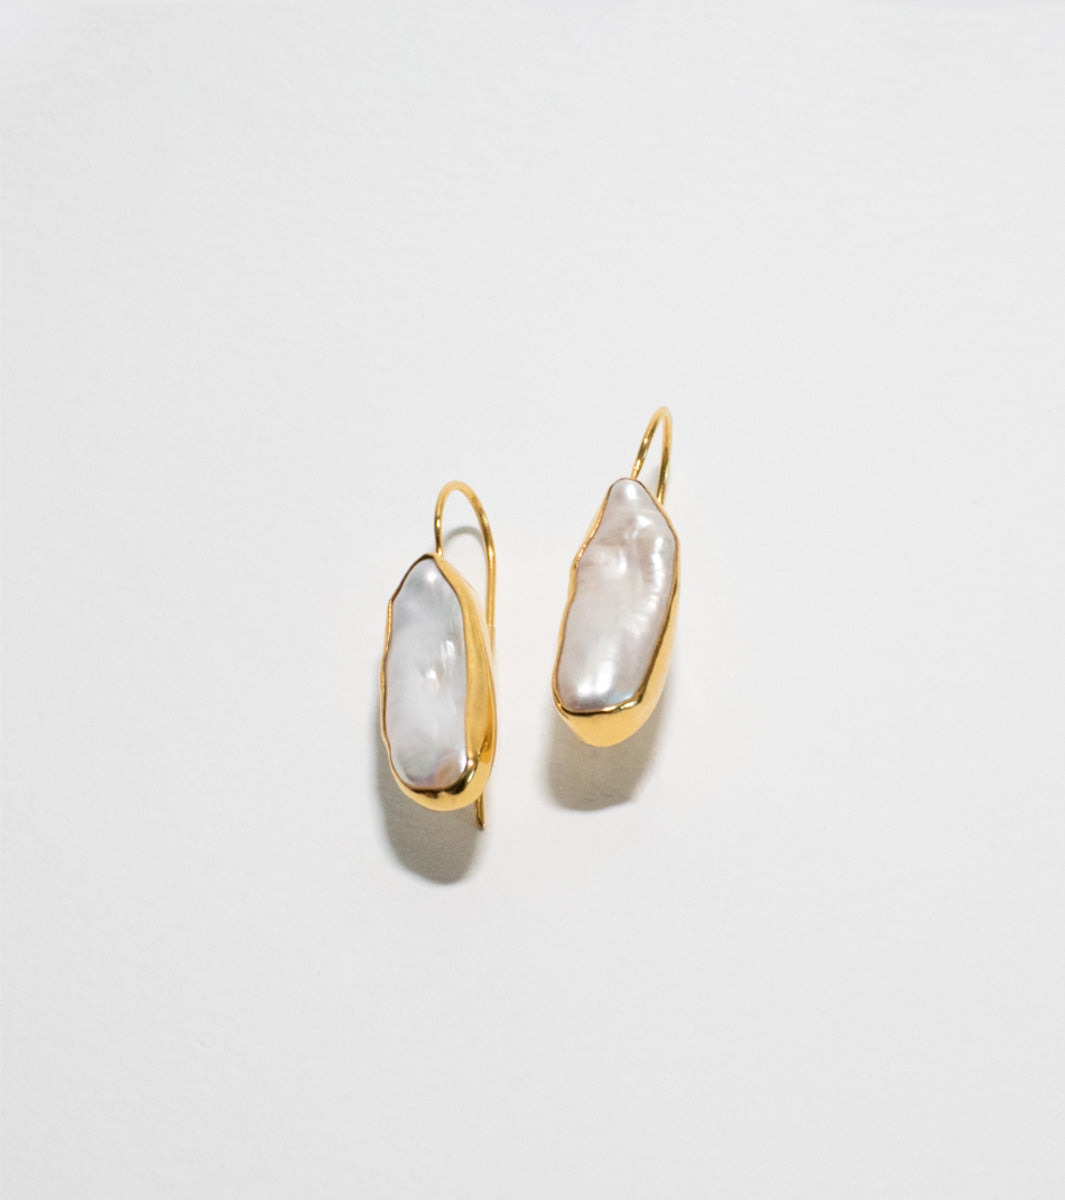 Gold plated pearl earrings on white background